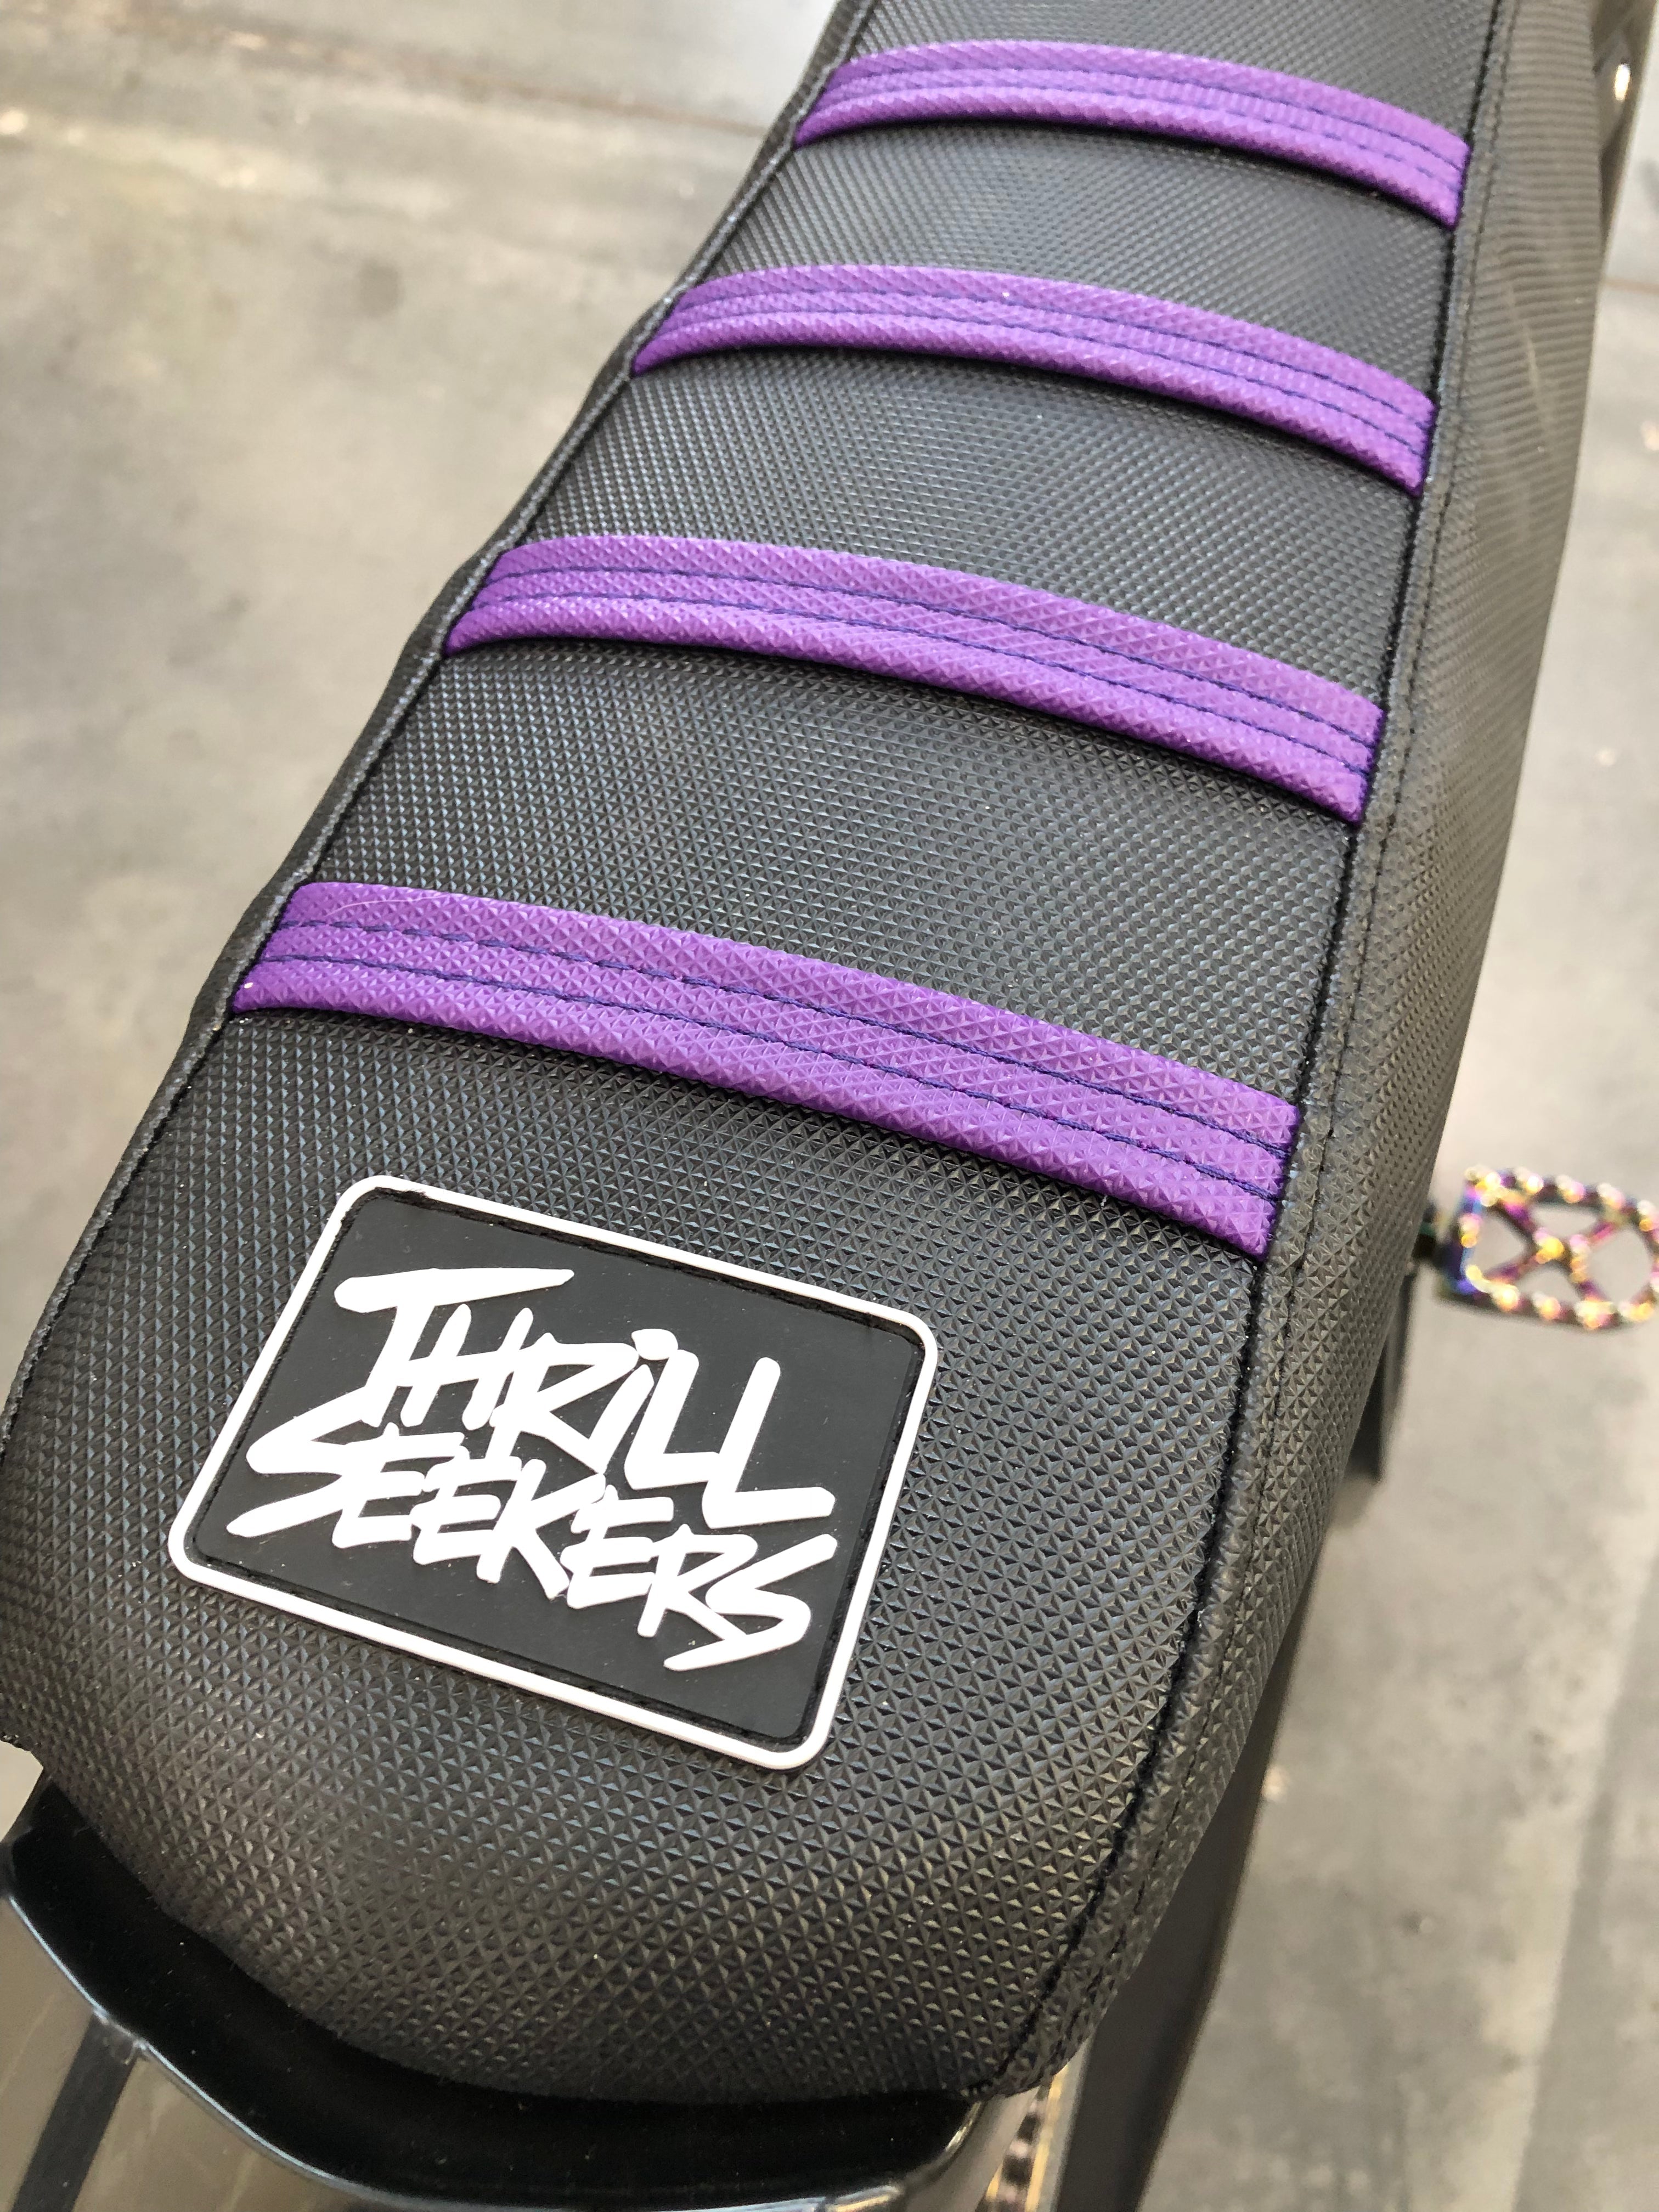 Thrill Seekers Seat Cover for Talaria